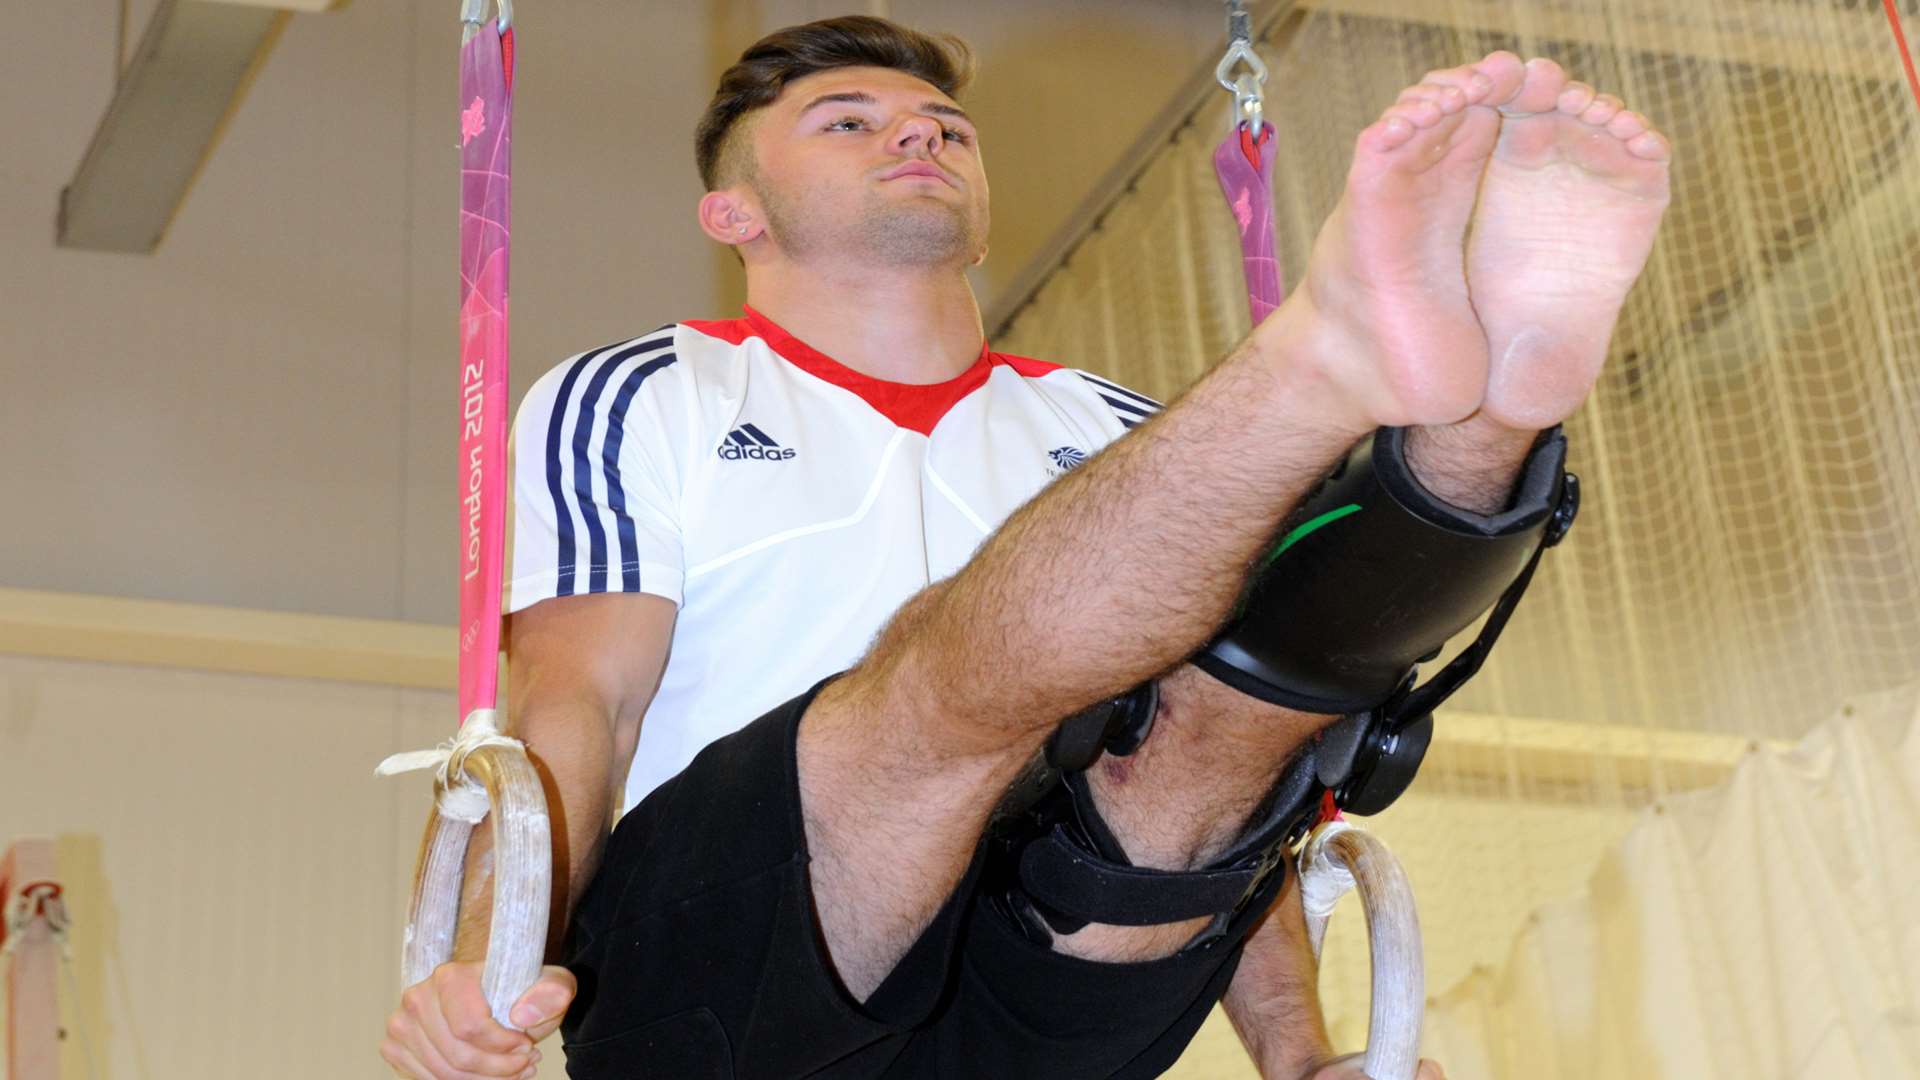 The leg brace may stop him competing, but it won't put a stop to his training regime.